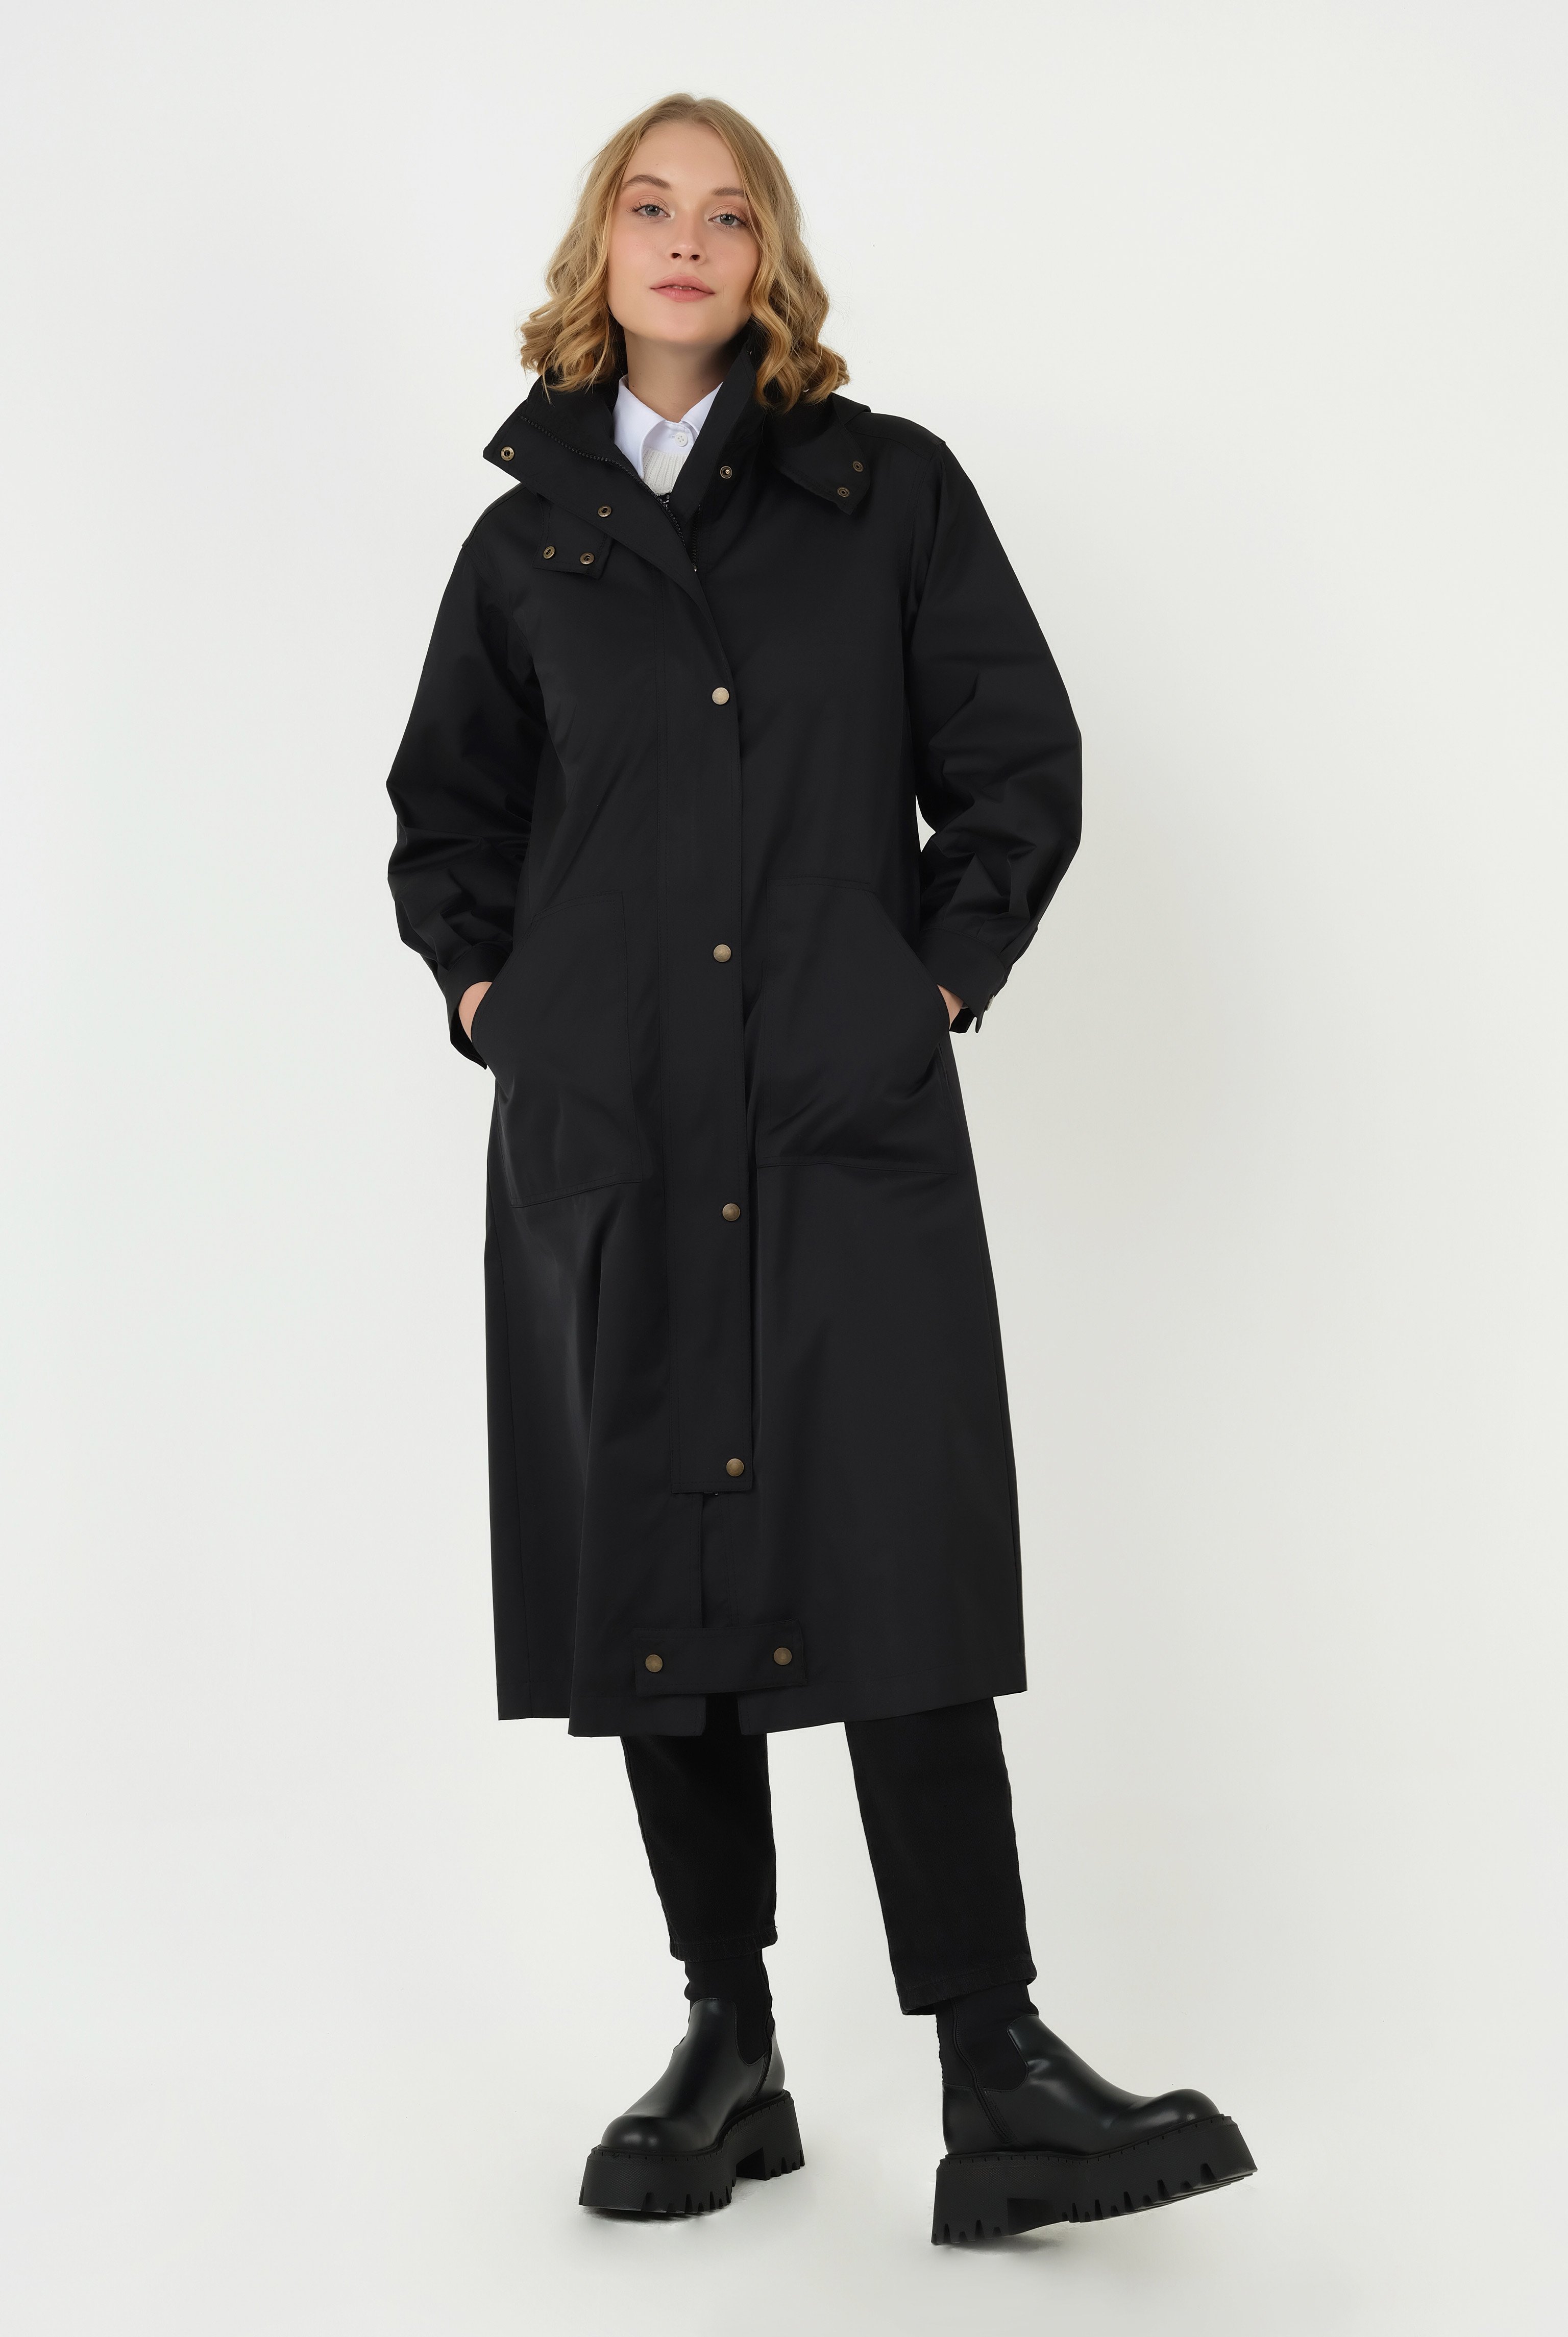 Sport Stitched Trench Coat Black